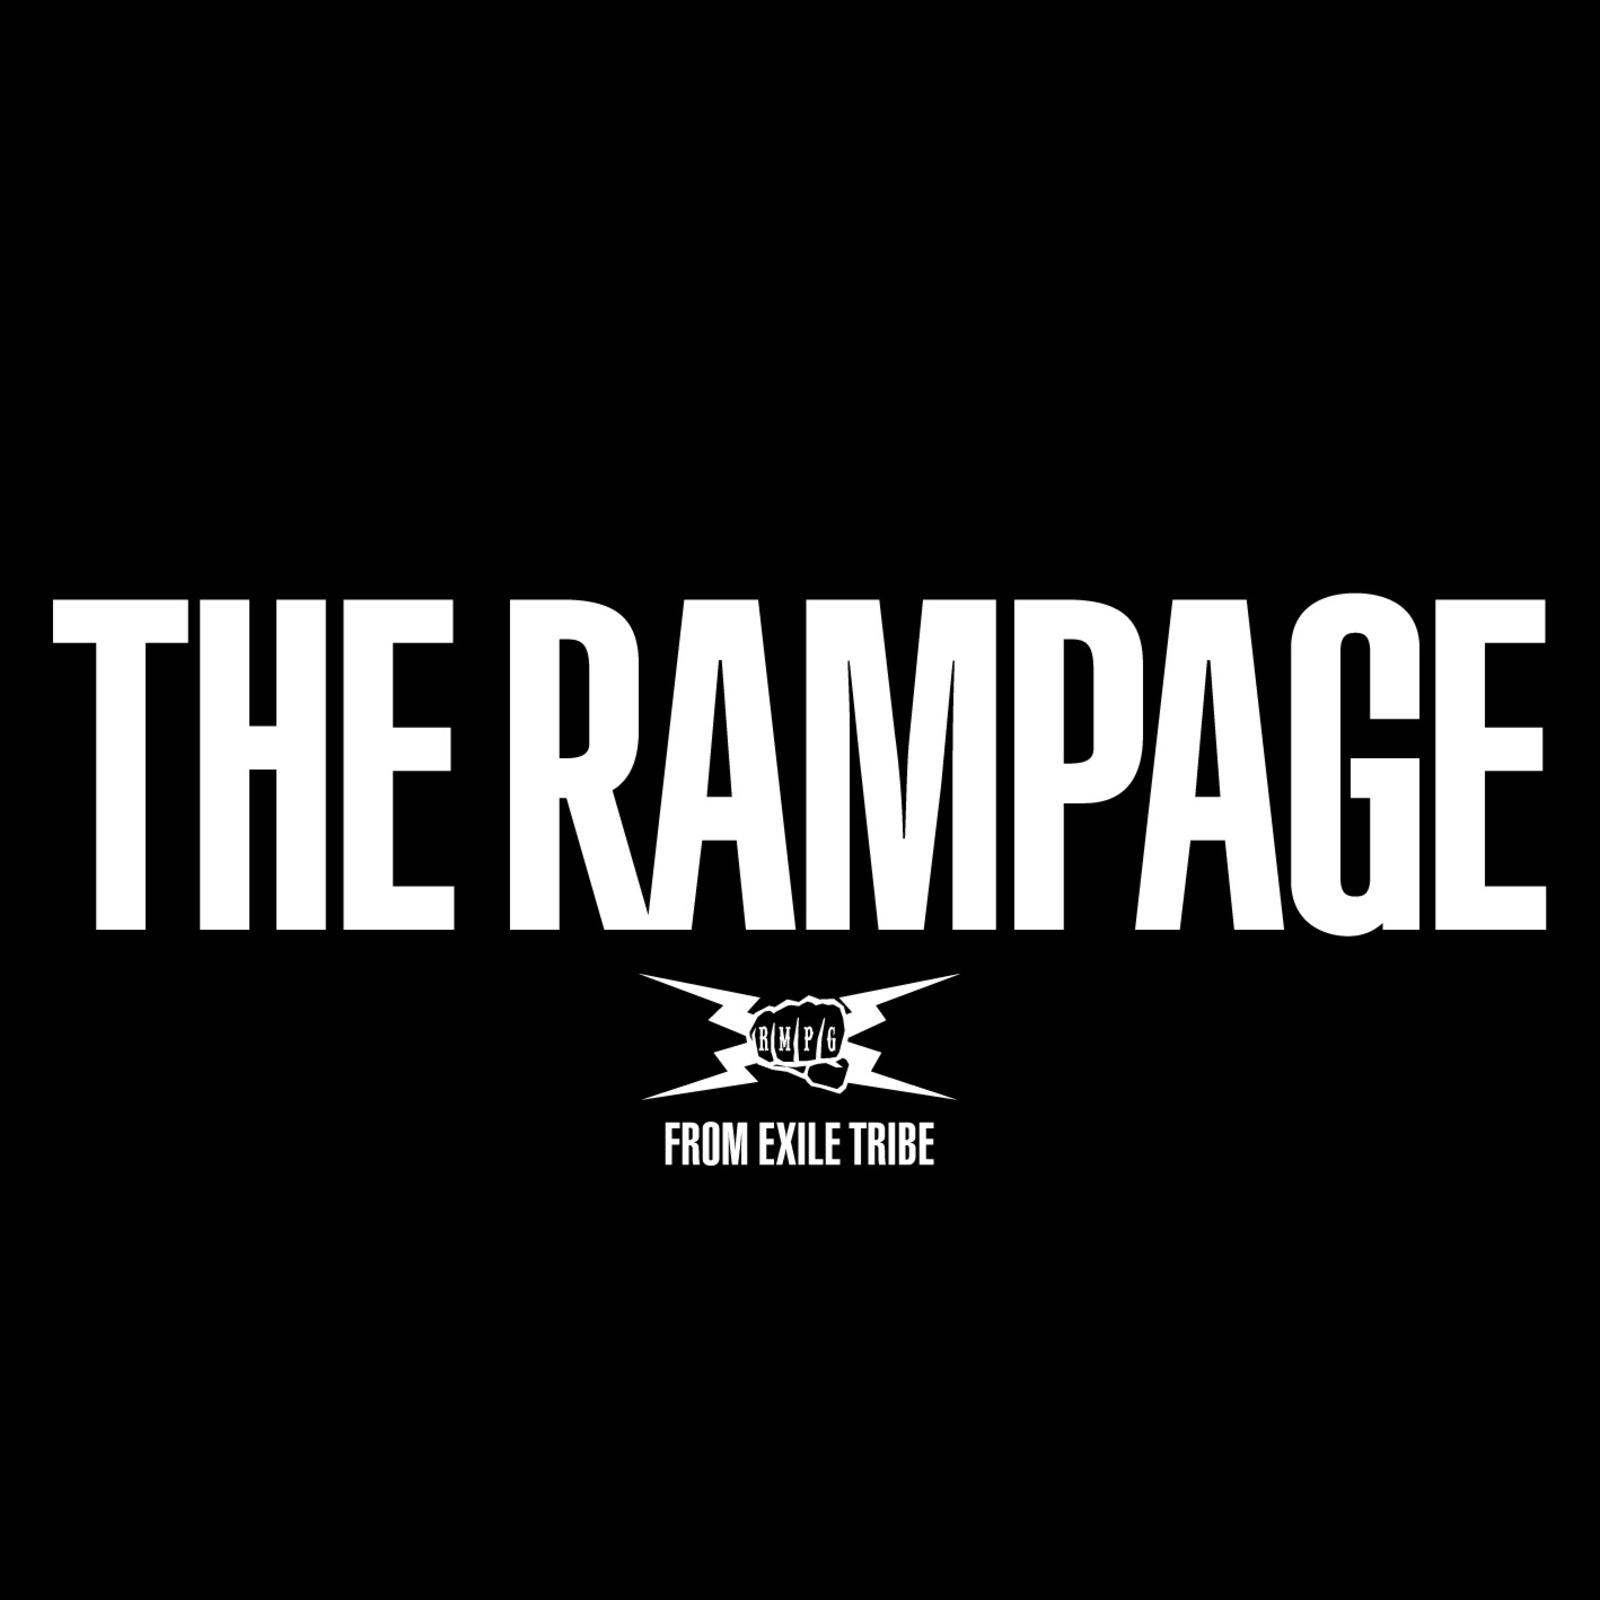 The Typhoon Eye歌词 歌手THE RAMPAGE from EXILE TRIBE-专辑THE RAMPAGE-单曲《The Typhoon Eye》LRC歌词下载